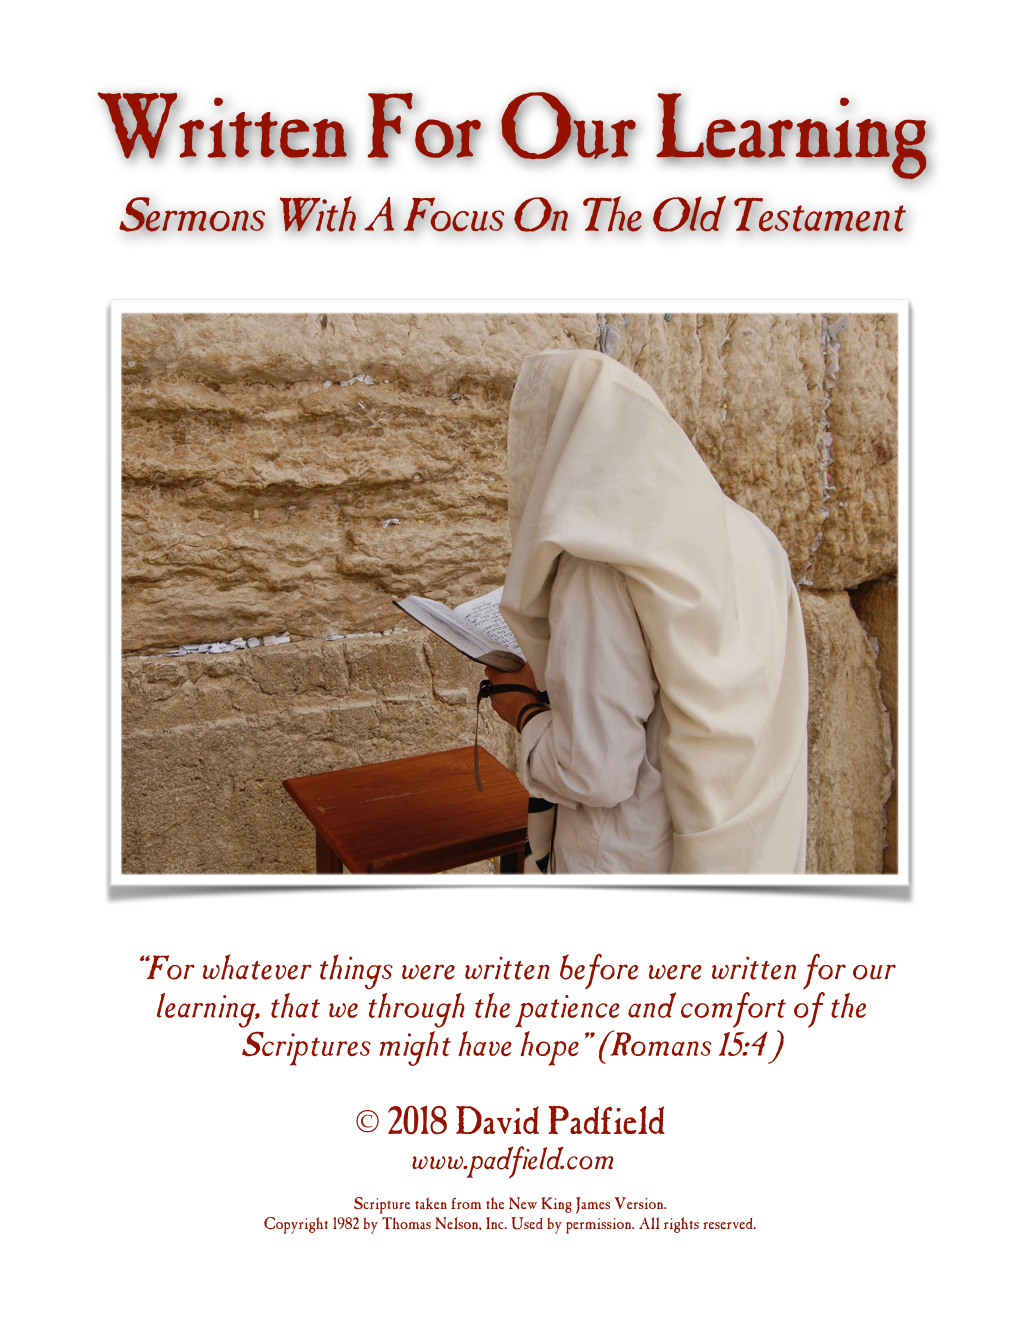 Written for Our Learning Sermons with a Focus on the Old Testament